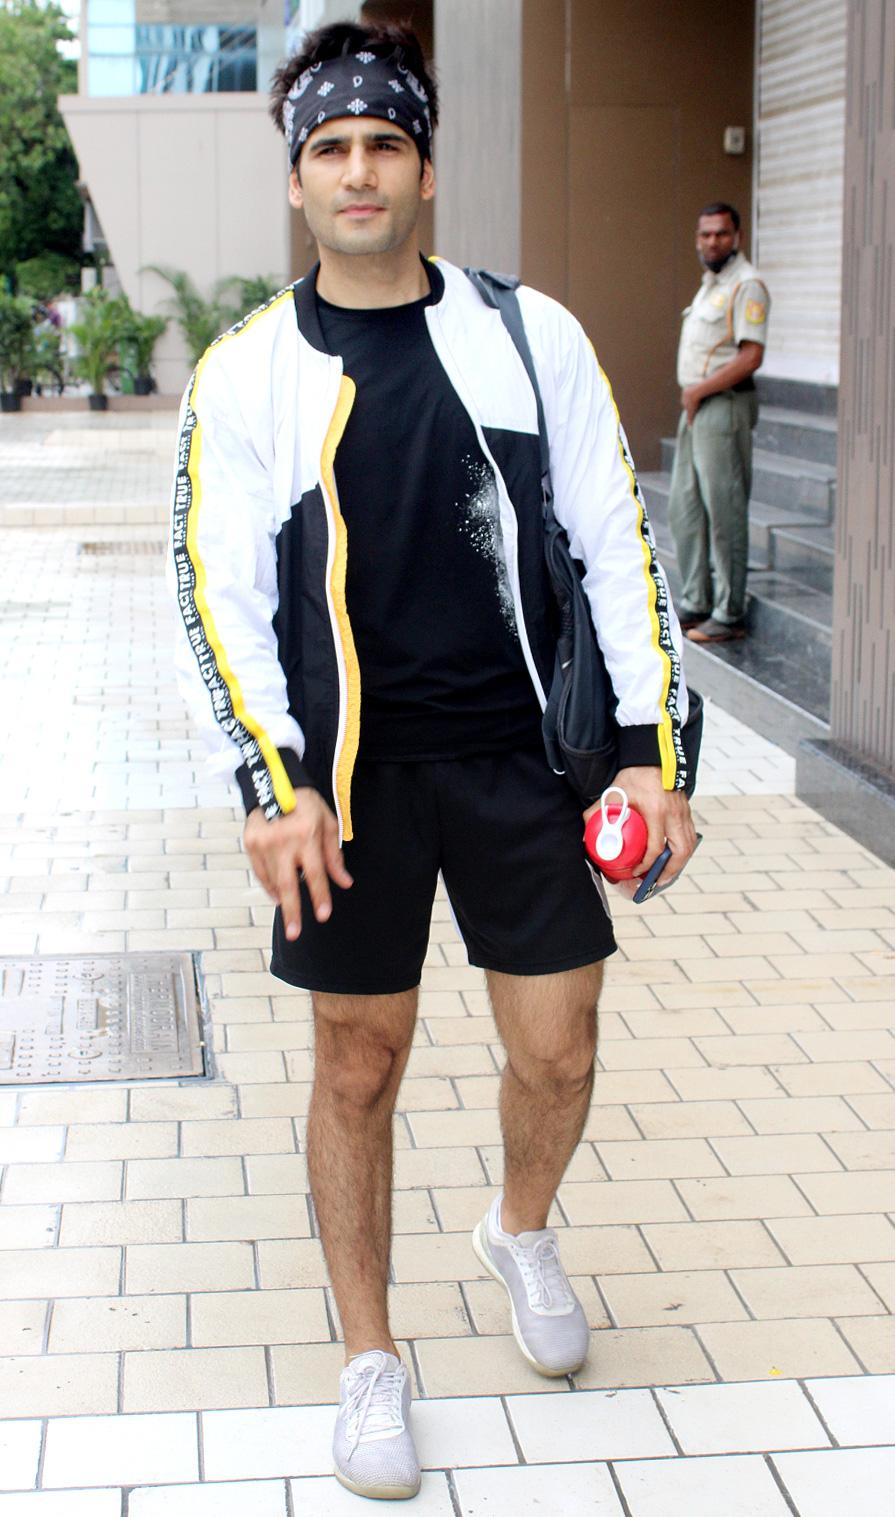 Karan Tacker happily posed for the photographers as he arrived at his fitness studio in Andheri.